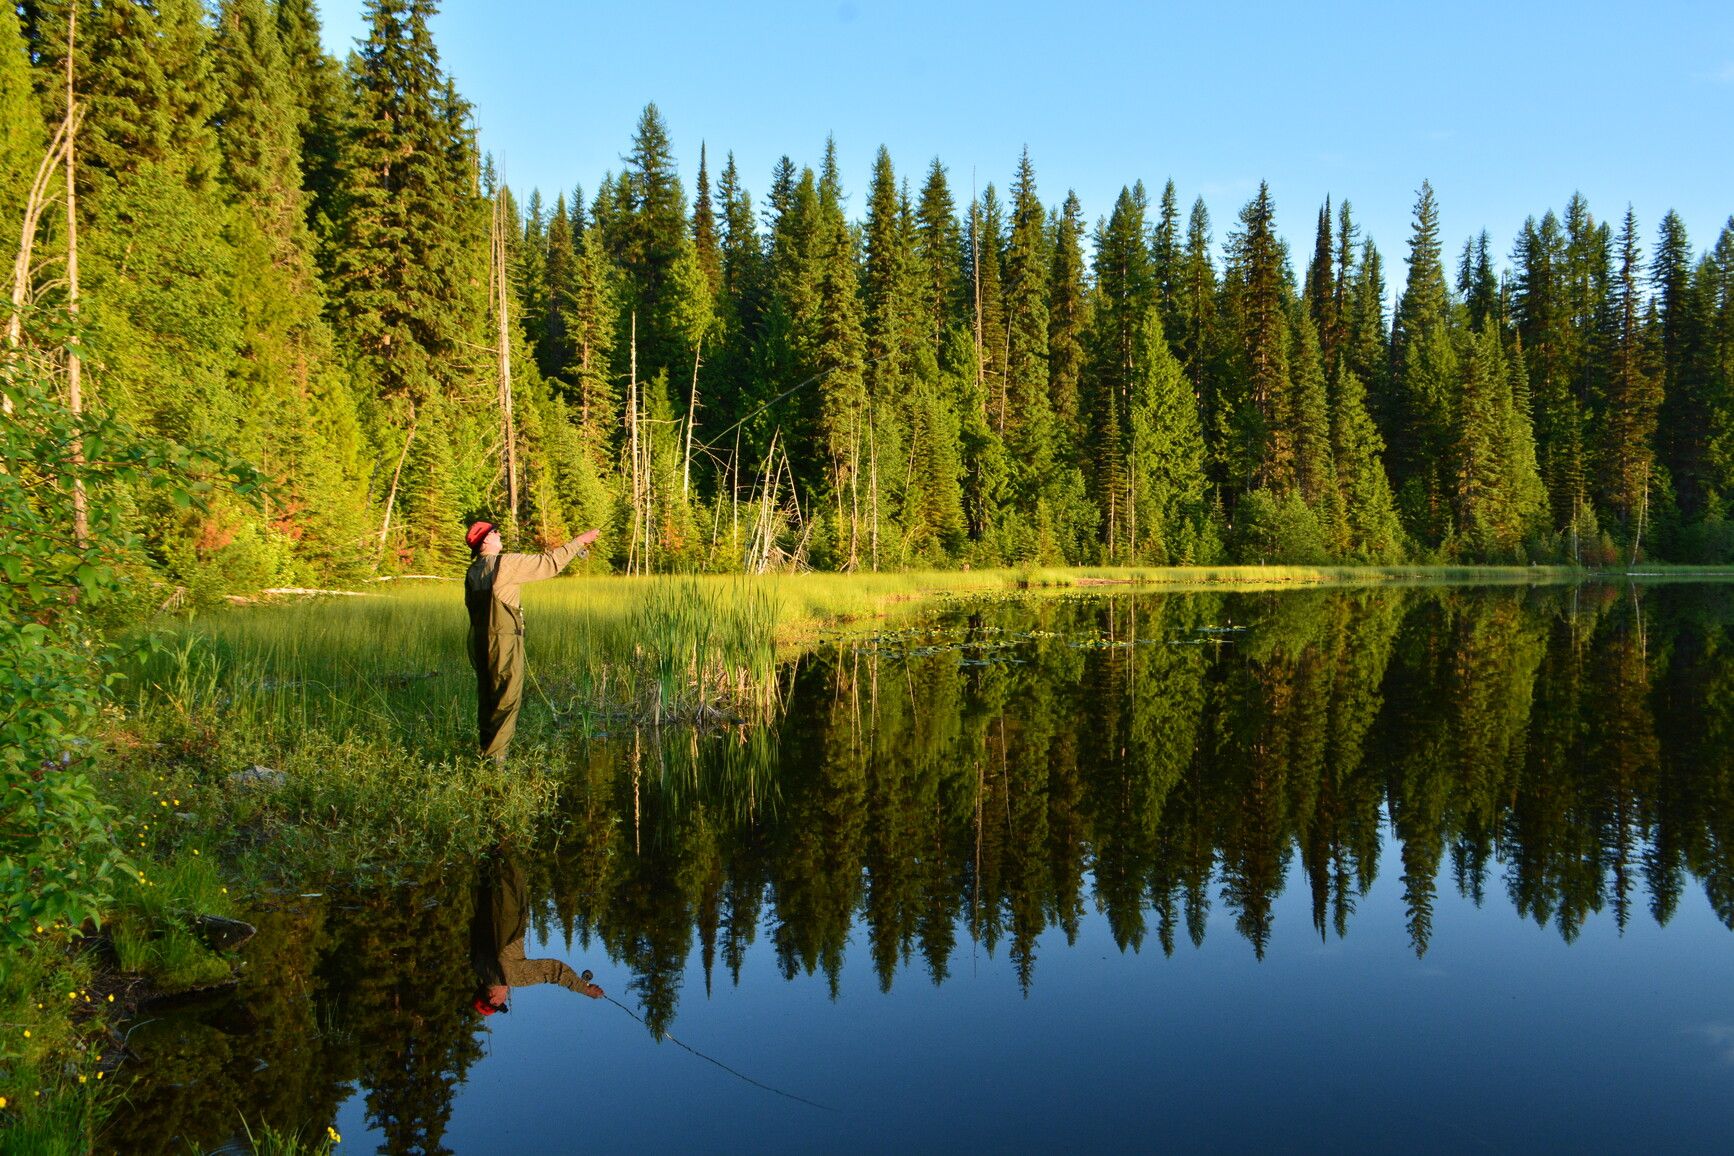 Experience fly fishing along the shoreline of Second Lake in Champion Lakes Park.